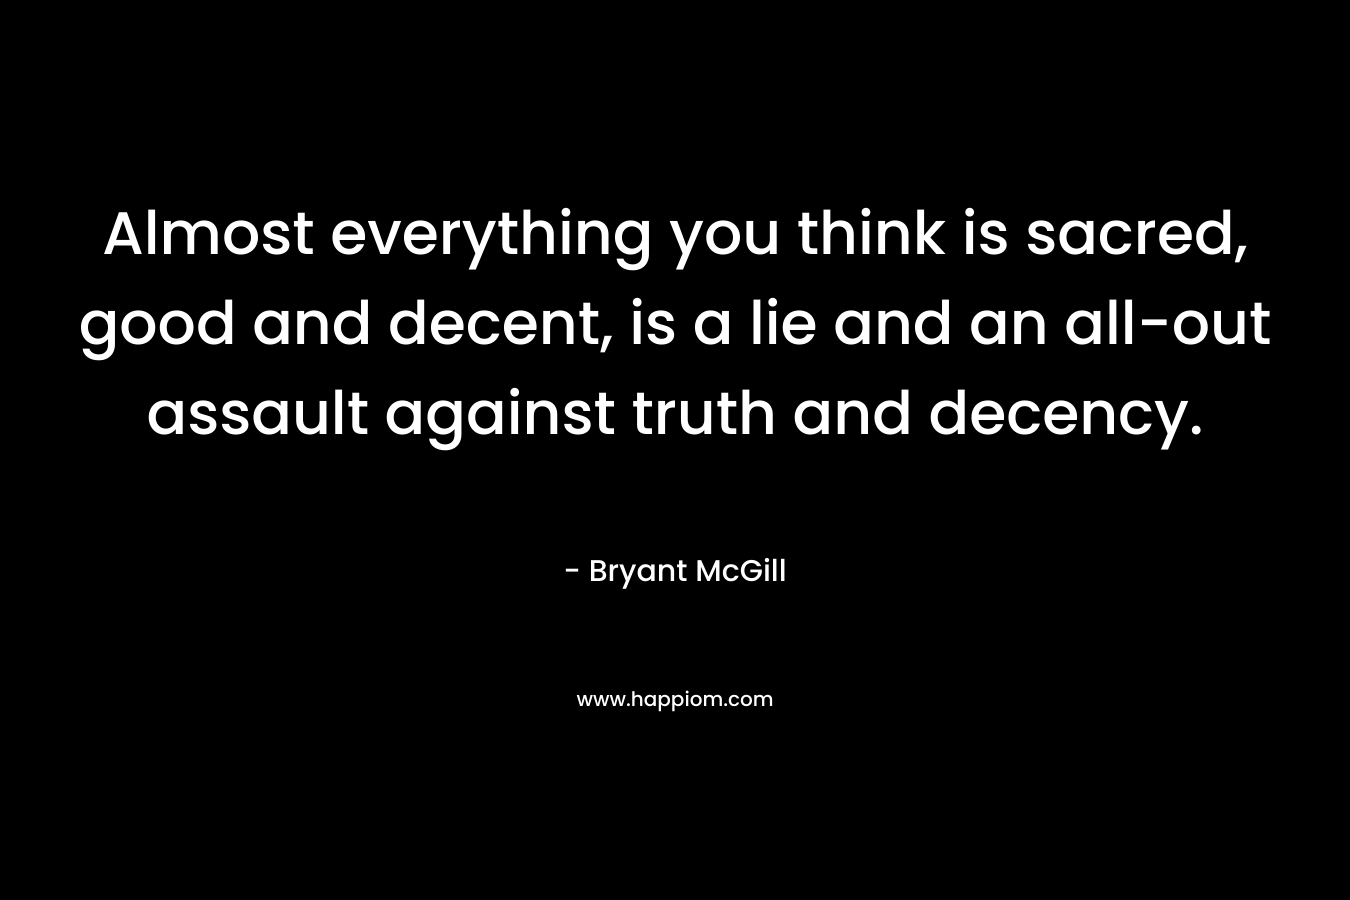 Almost everything you think is sacred, good and decent, is a lie and an all-out assault against truth and decency. – Bryant McGill